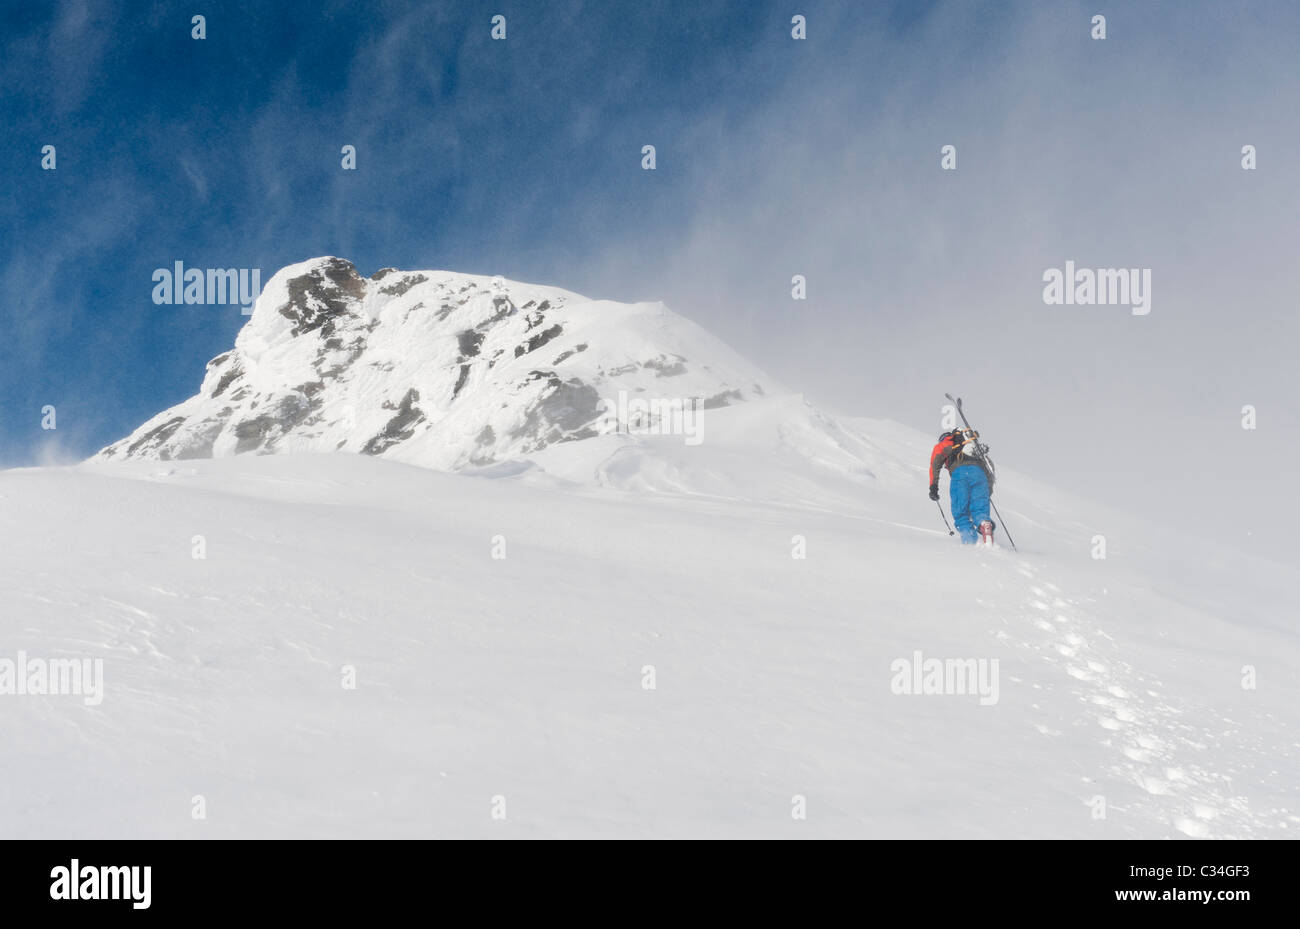 A free skier climbing up a snowy mountain side at Lofoten Islands, Norway Stock Photo